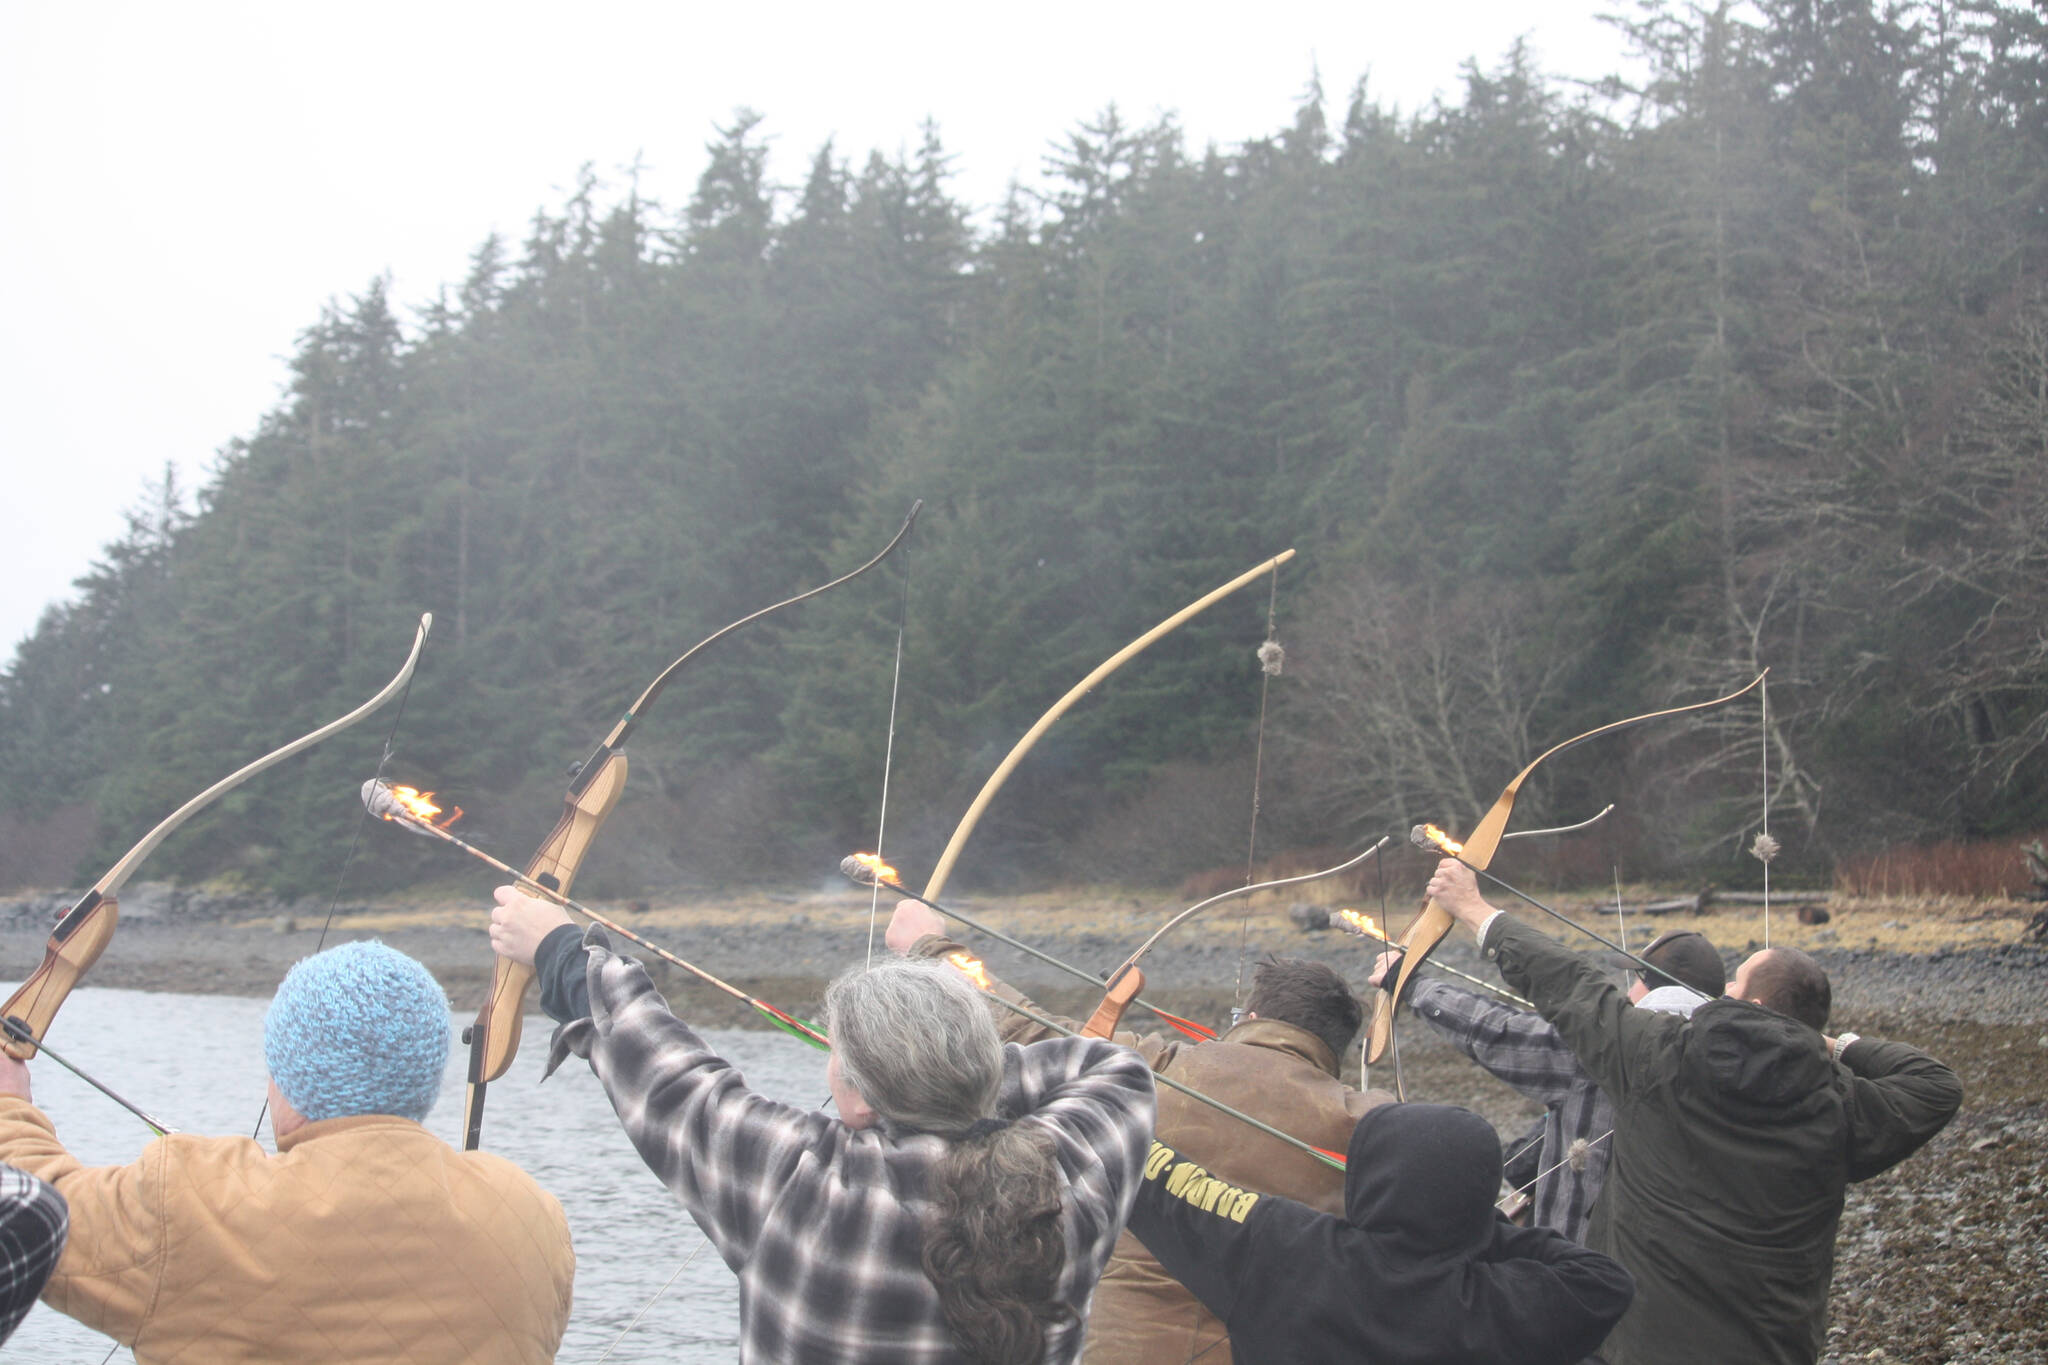 Family and friends of Daniel Sargent shoot flaming arrows into Auke Bay on Saturday during Sargent’s memorial at Raven Shelter. Sargent was one of the founding members of the Juneau Archery Club and was survived by his wife Lavena and daughter Tiffany Sargent Hallquist. (Jonson Kuhn / Juneau Empire)